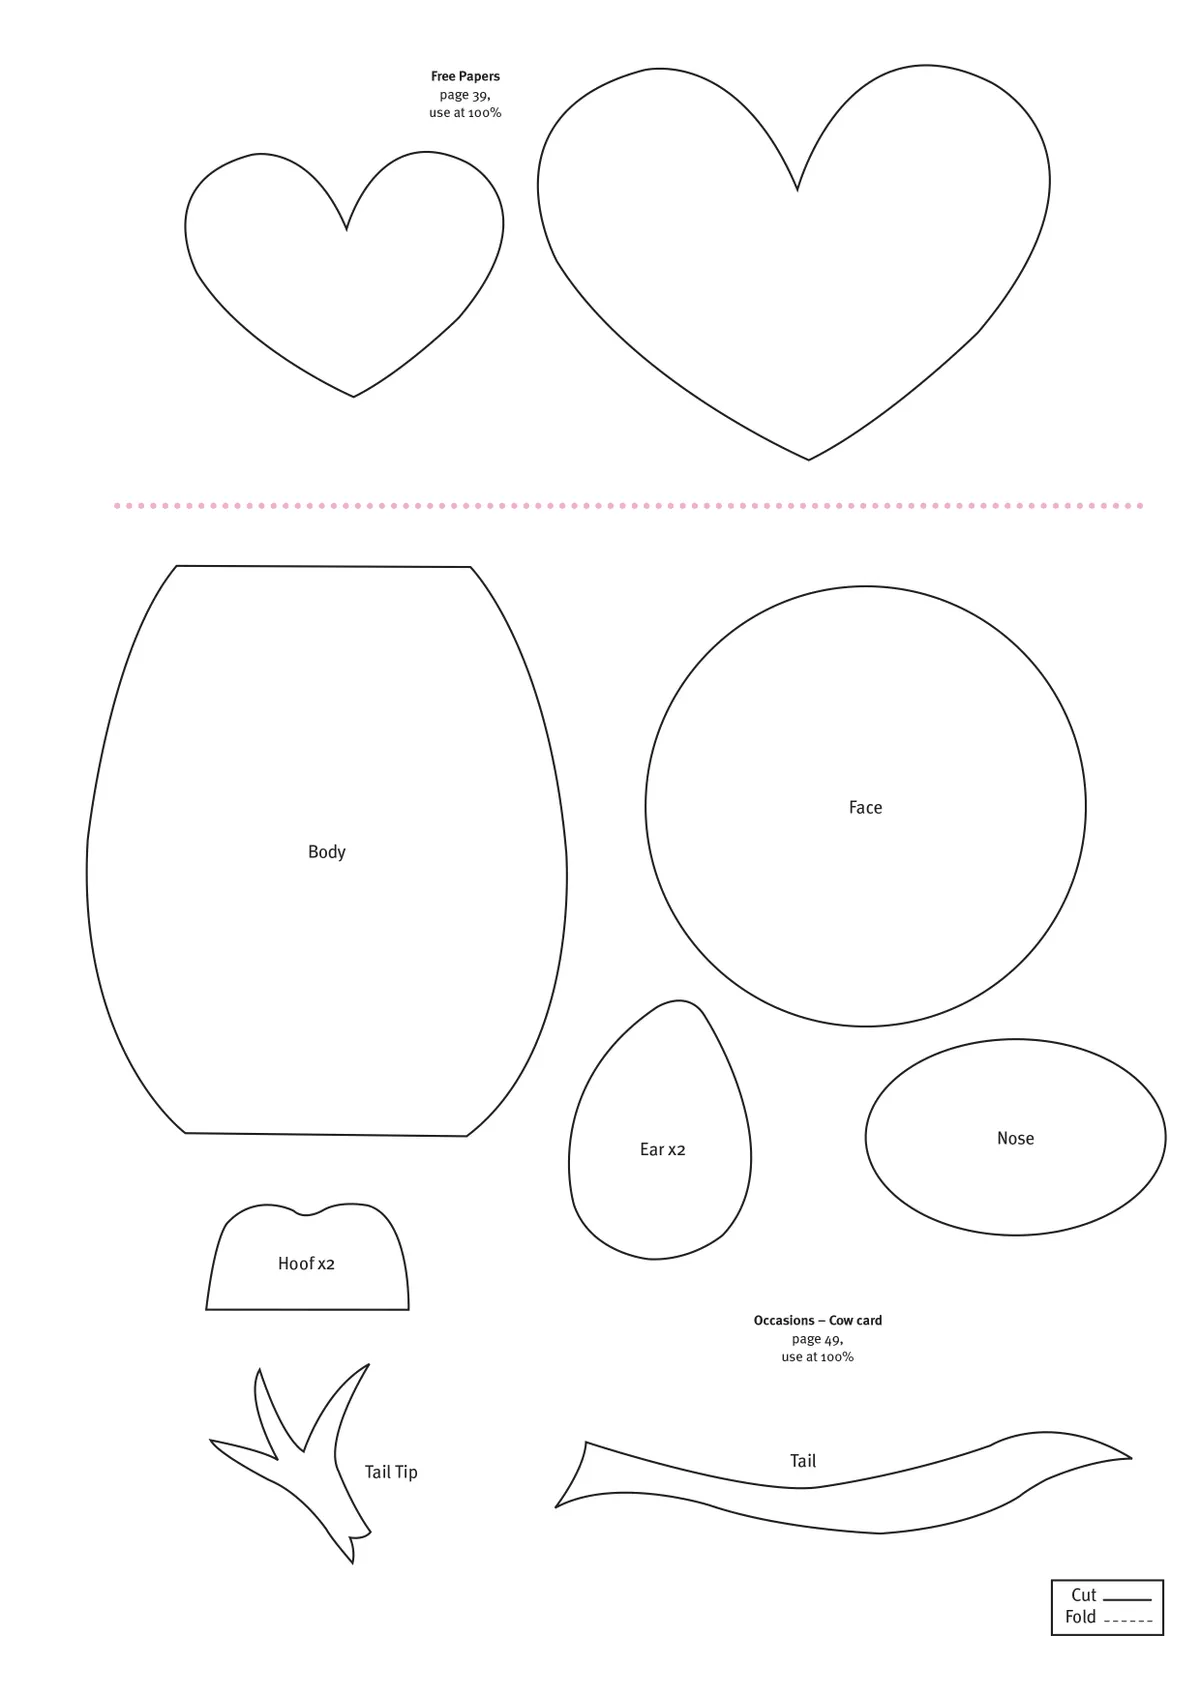 Free sofa gift box, papercraft fern and floral notelet templates 9